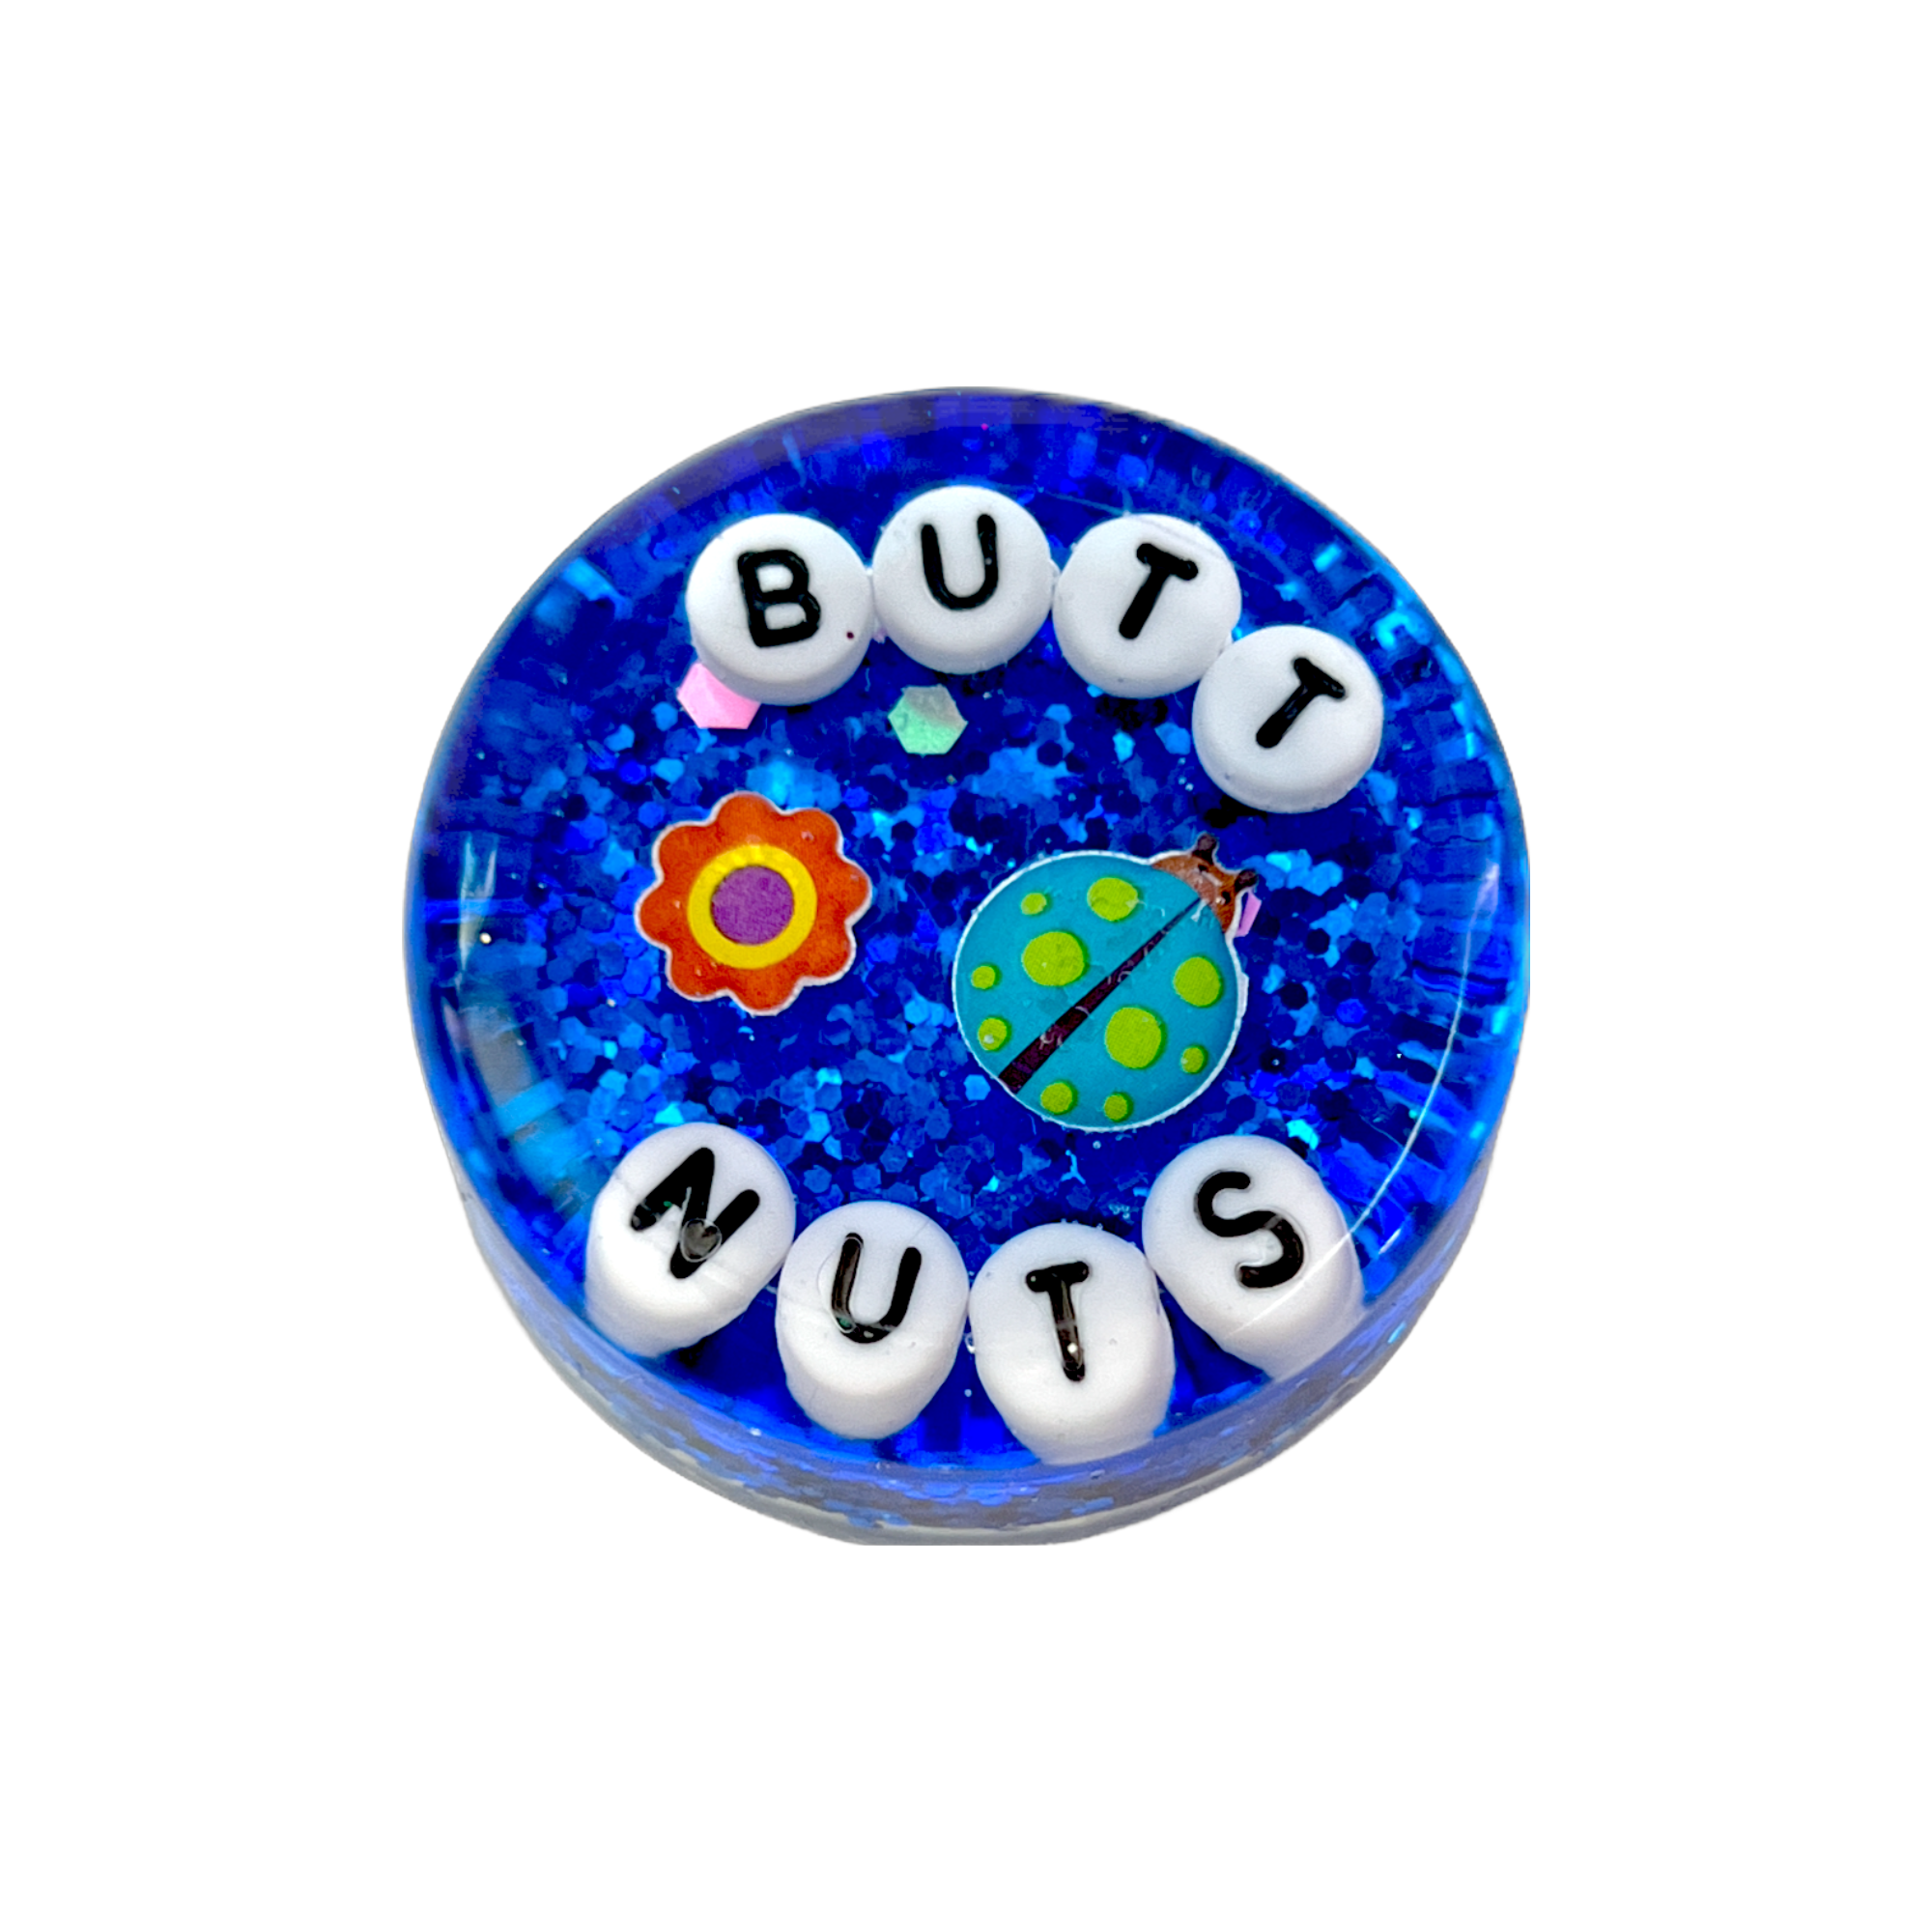 Butt Nuts - Shower Art - READY TO SHIP